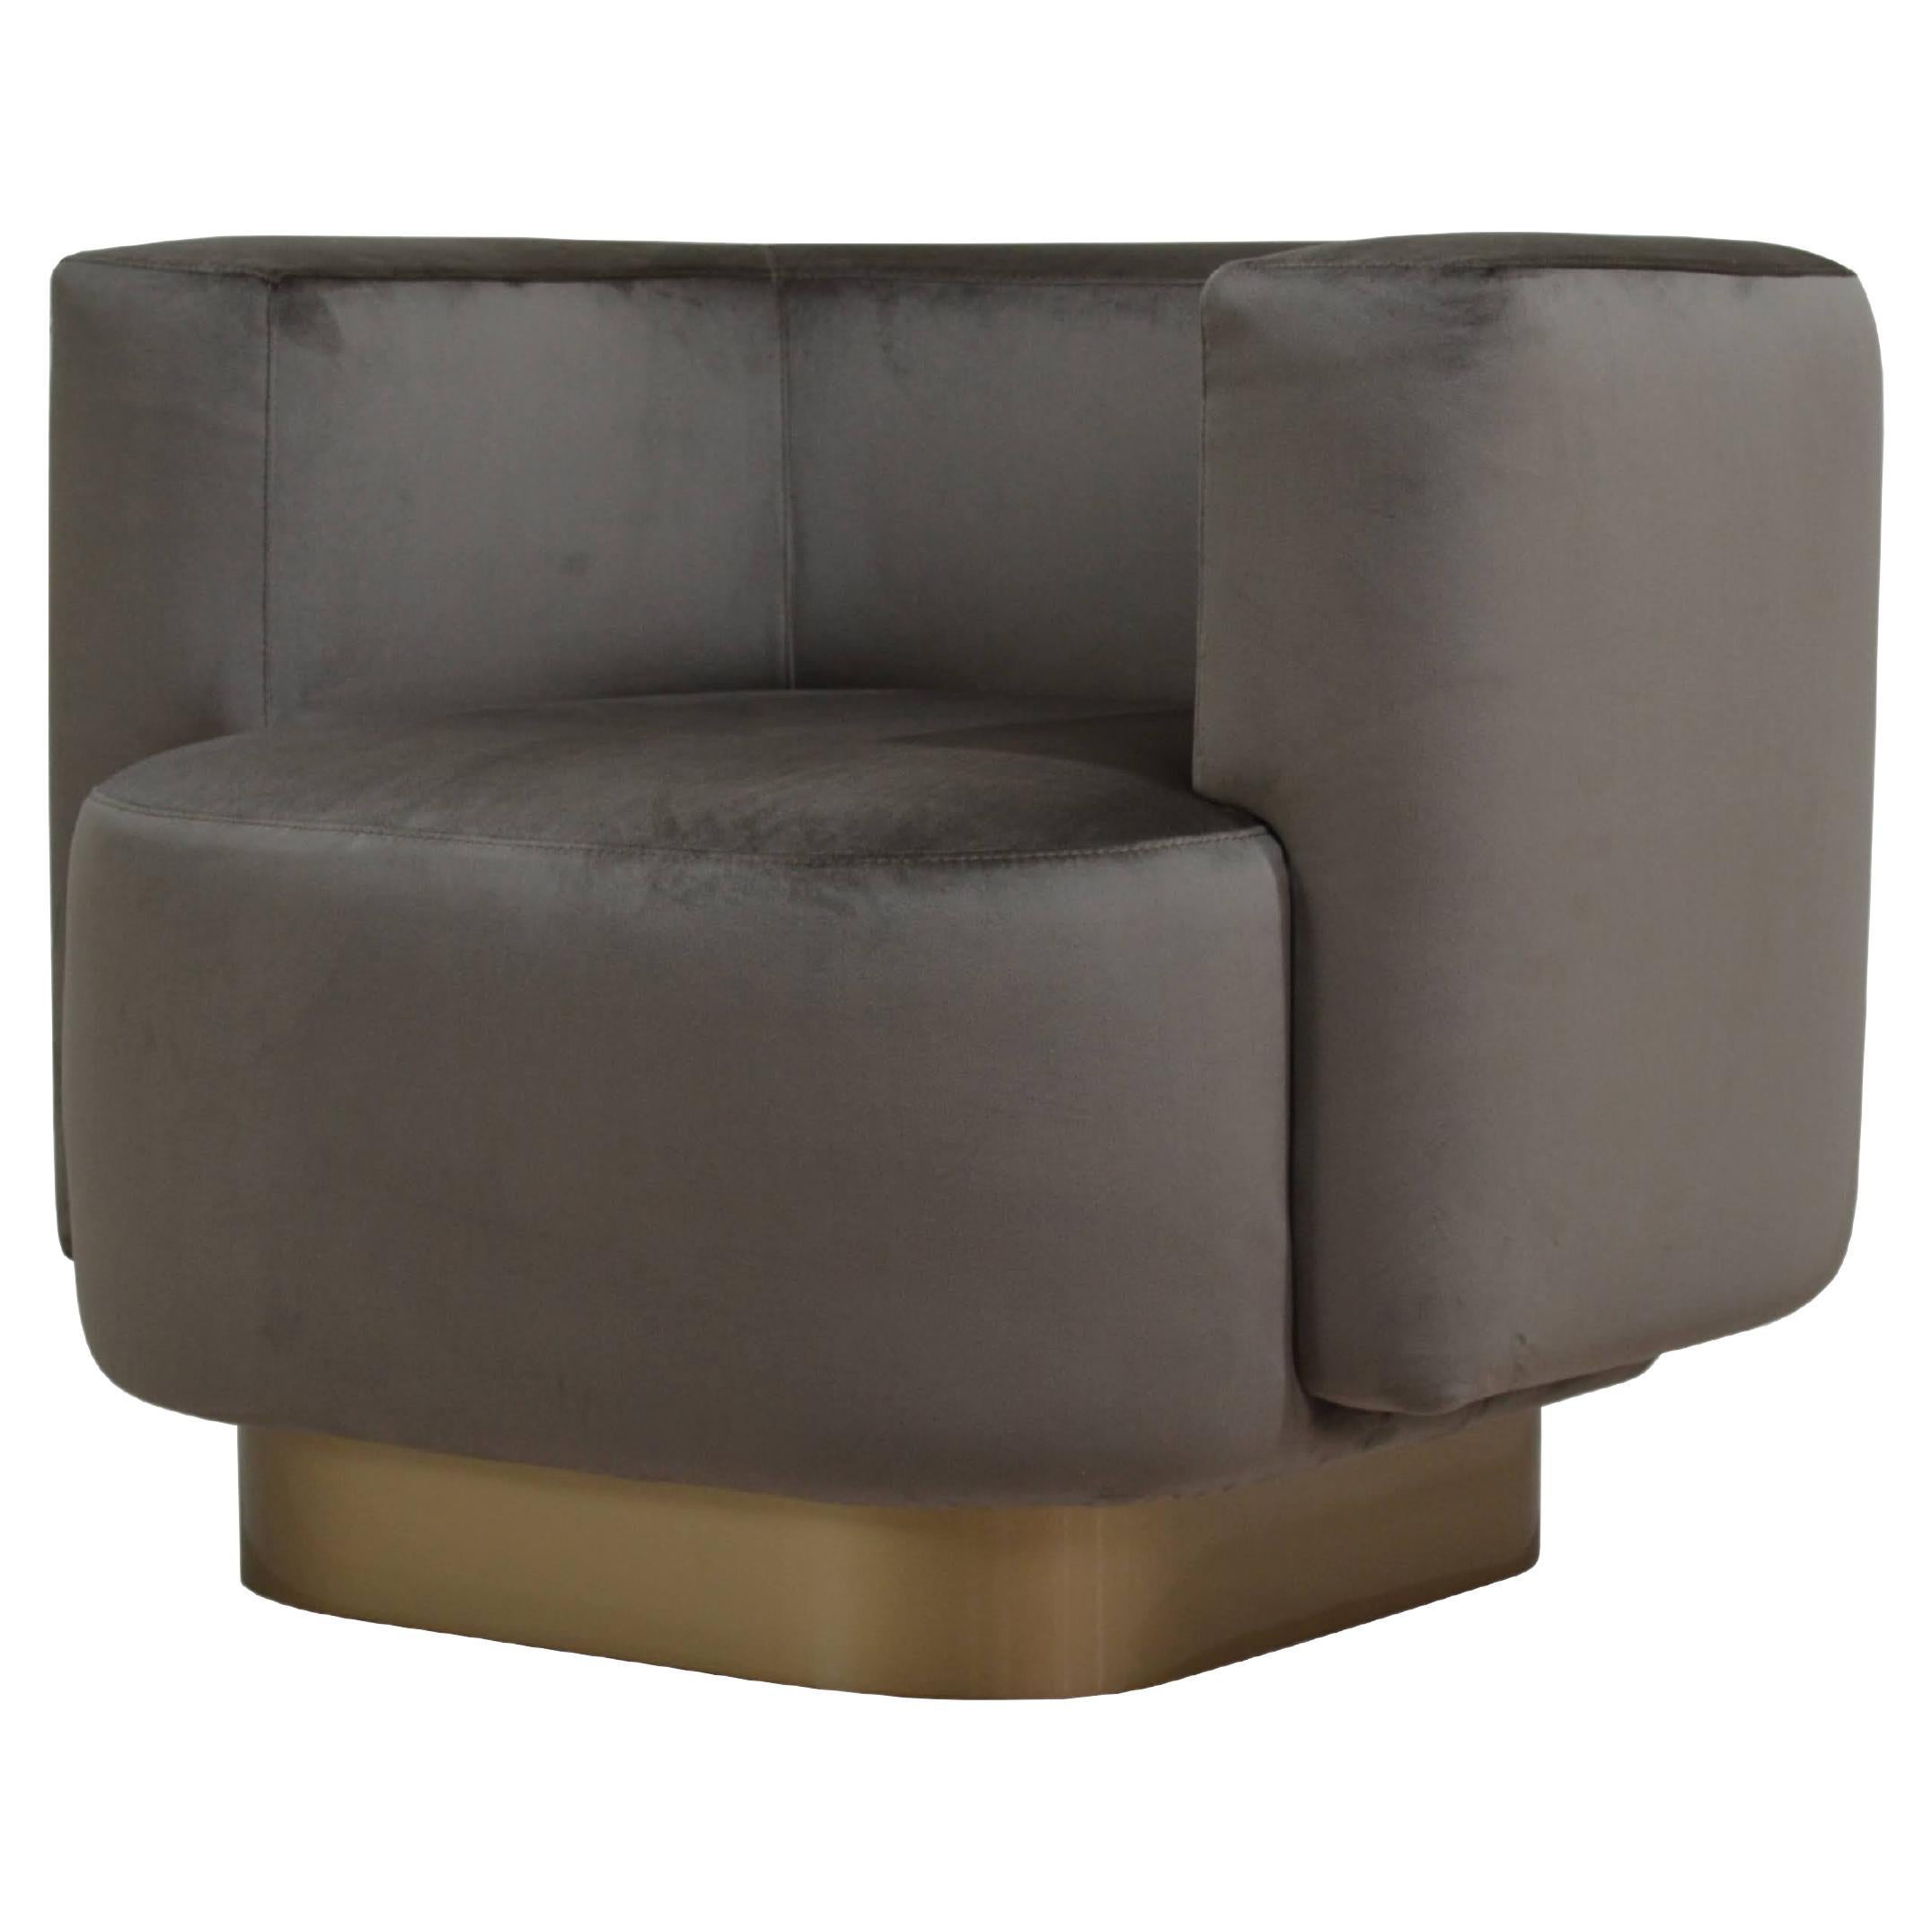 Italian Contemporary Lounge Upholstered Armchair in Mocha Brown Velvet Fabric For Sale